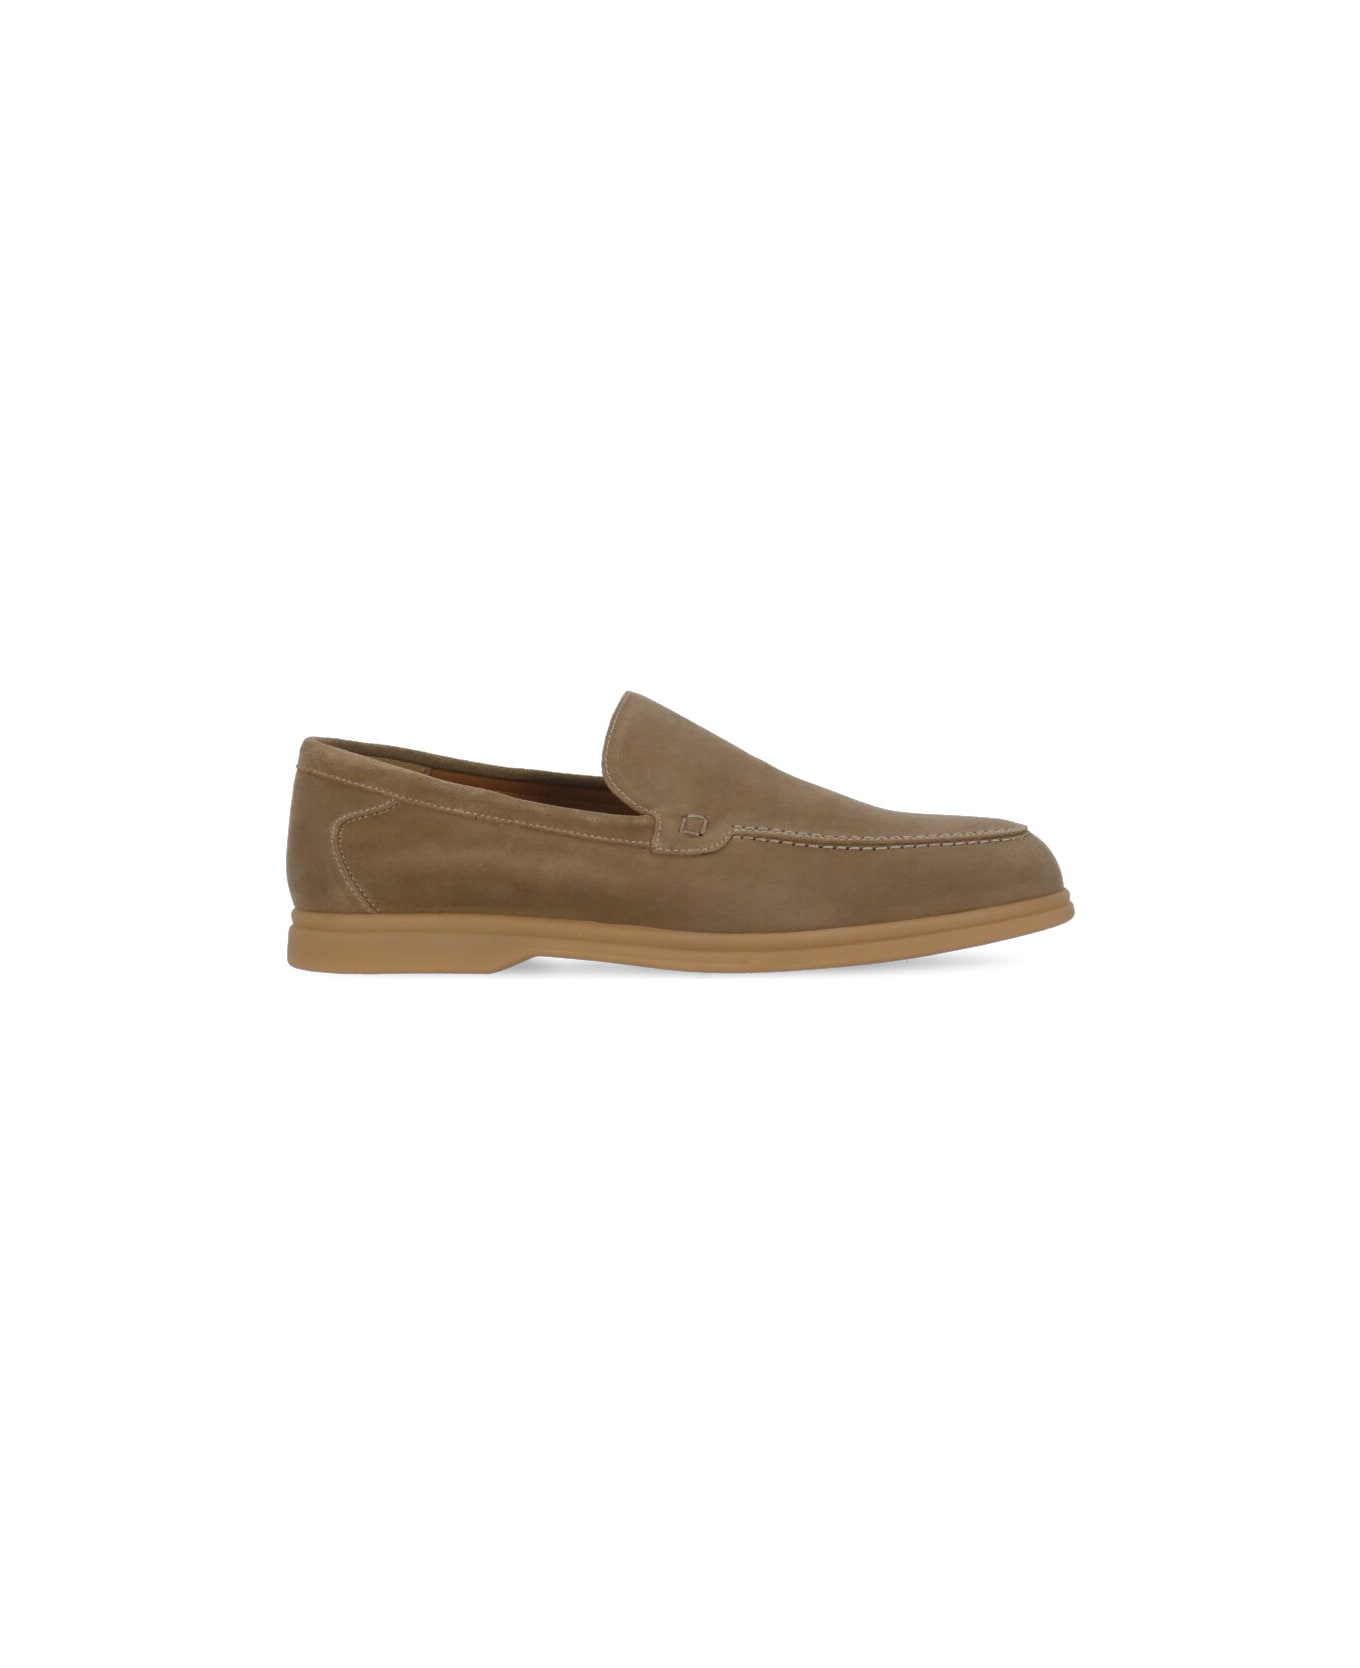 Doucal's Suede Leather Loafers - Beige ローファー＆デッキシューズ